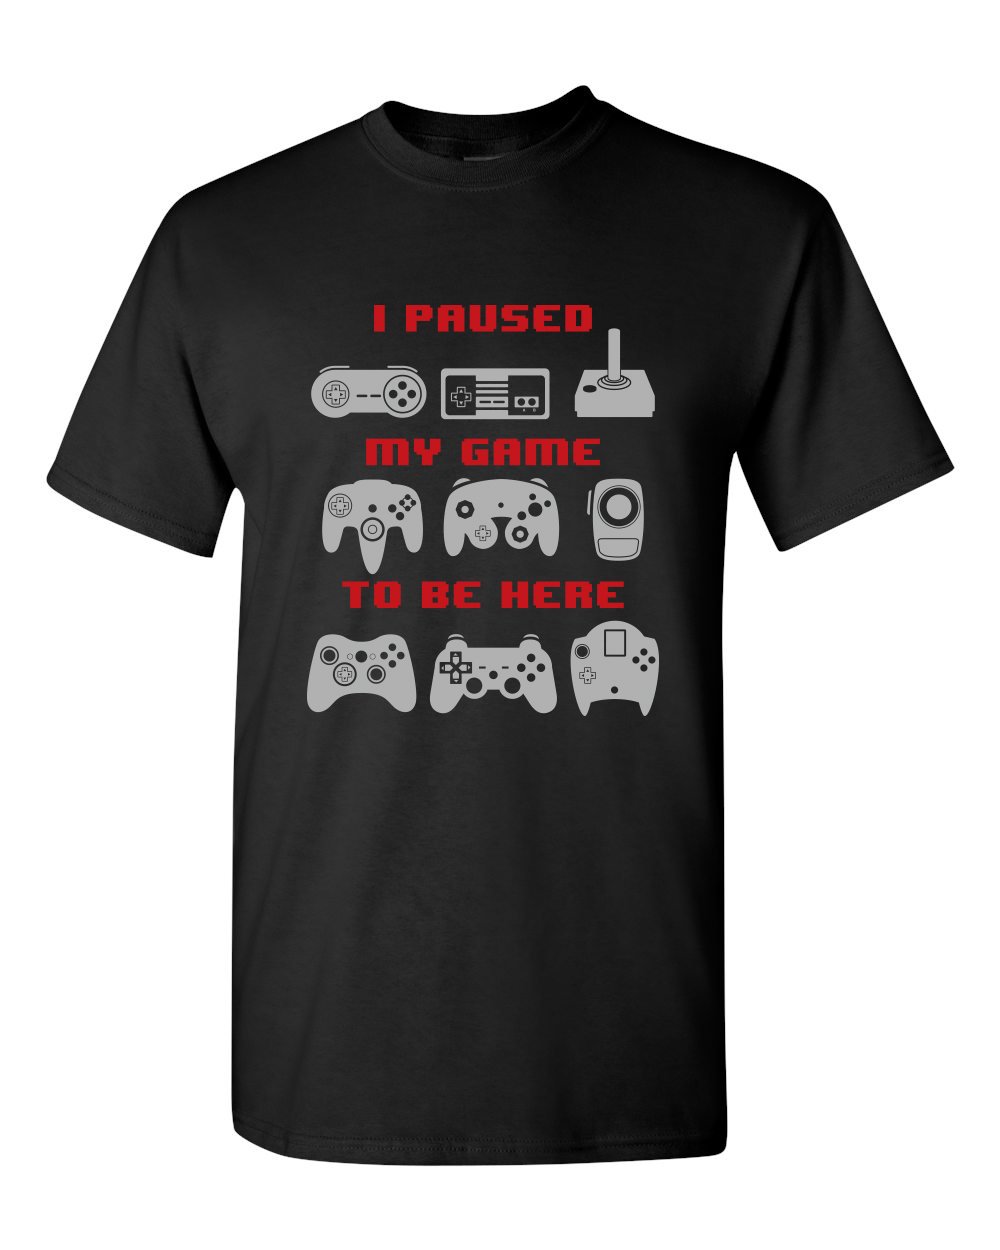 I Paused My Game to Be Here Video Gamer Humor Joke Gifts for Teenage Boys T-Shirt Funny T Shirt for Men